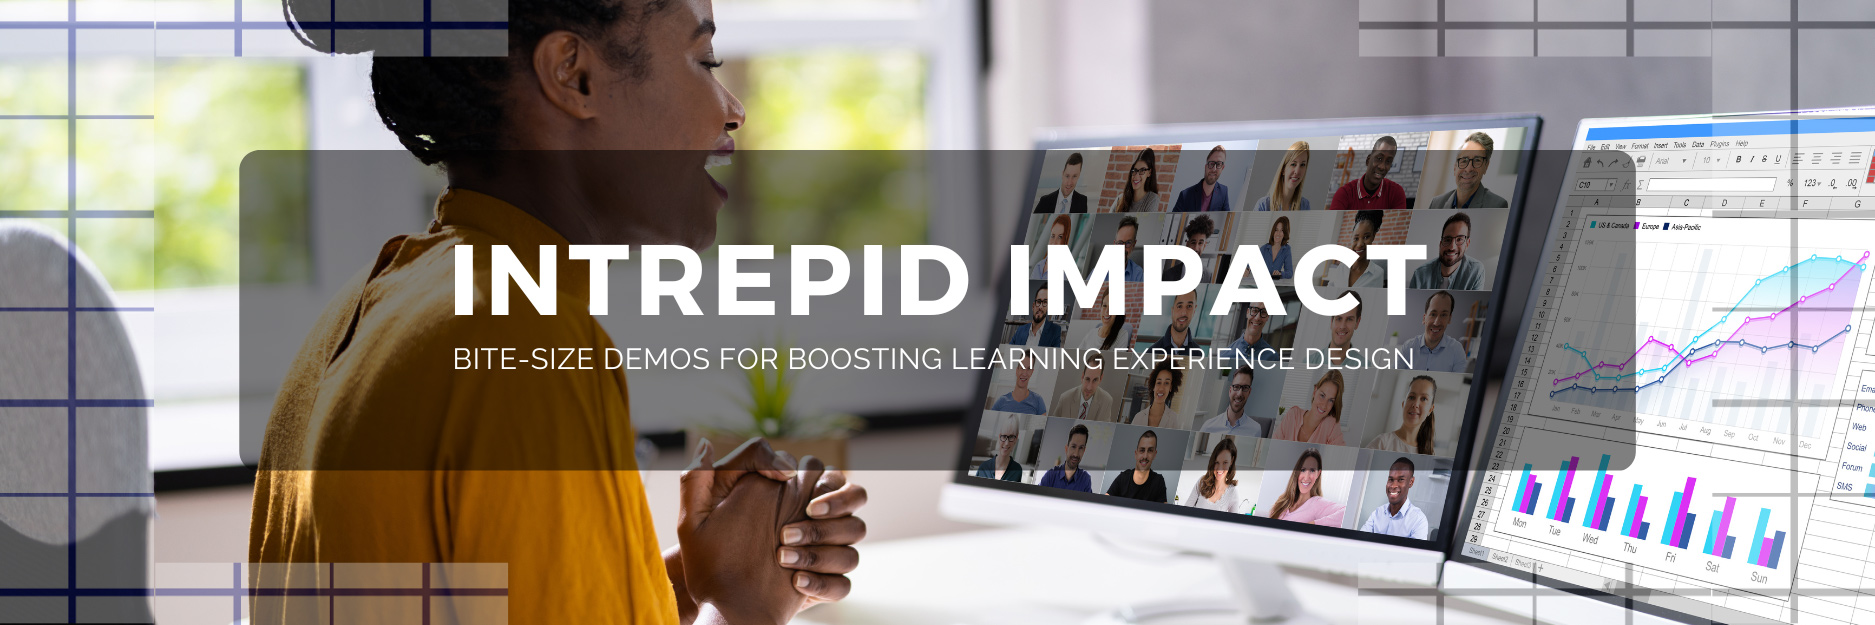 Intrepid Impact Demo Series - Learning Experience Design